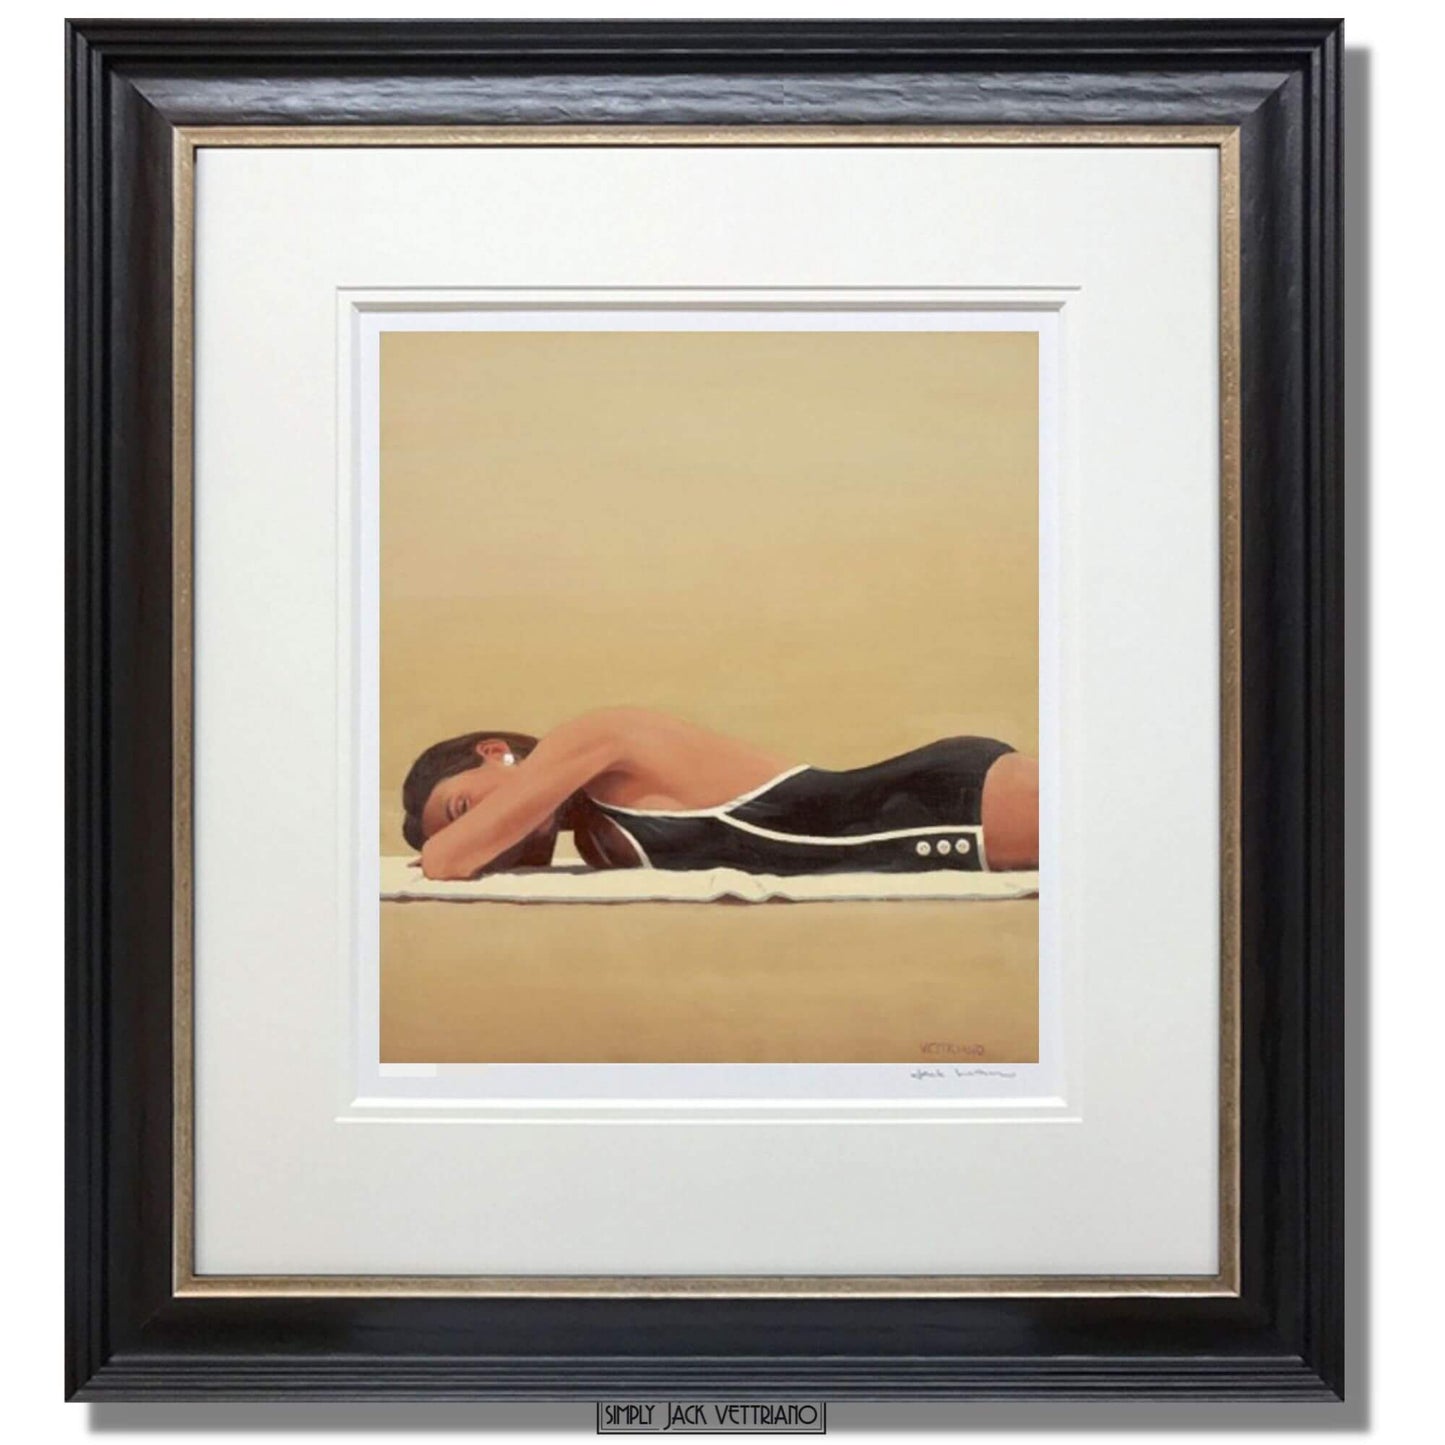 Scorched by Jack Vettriano Limited Edition Framed